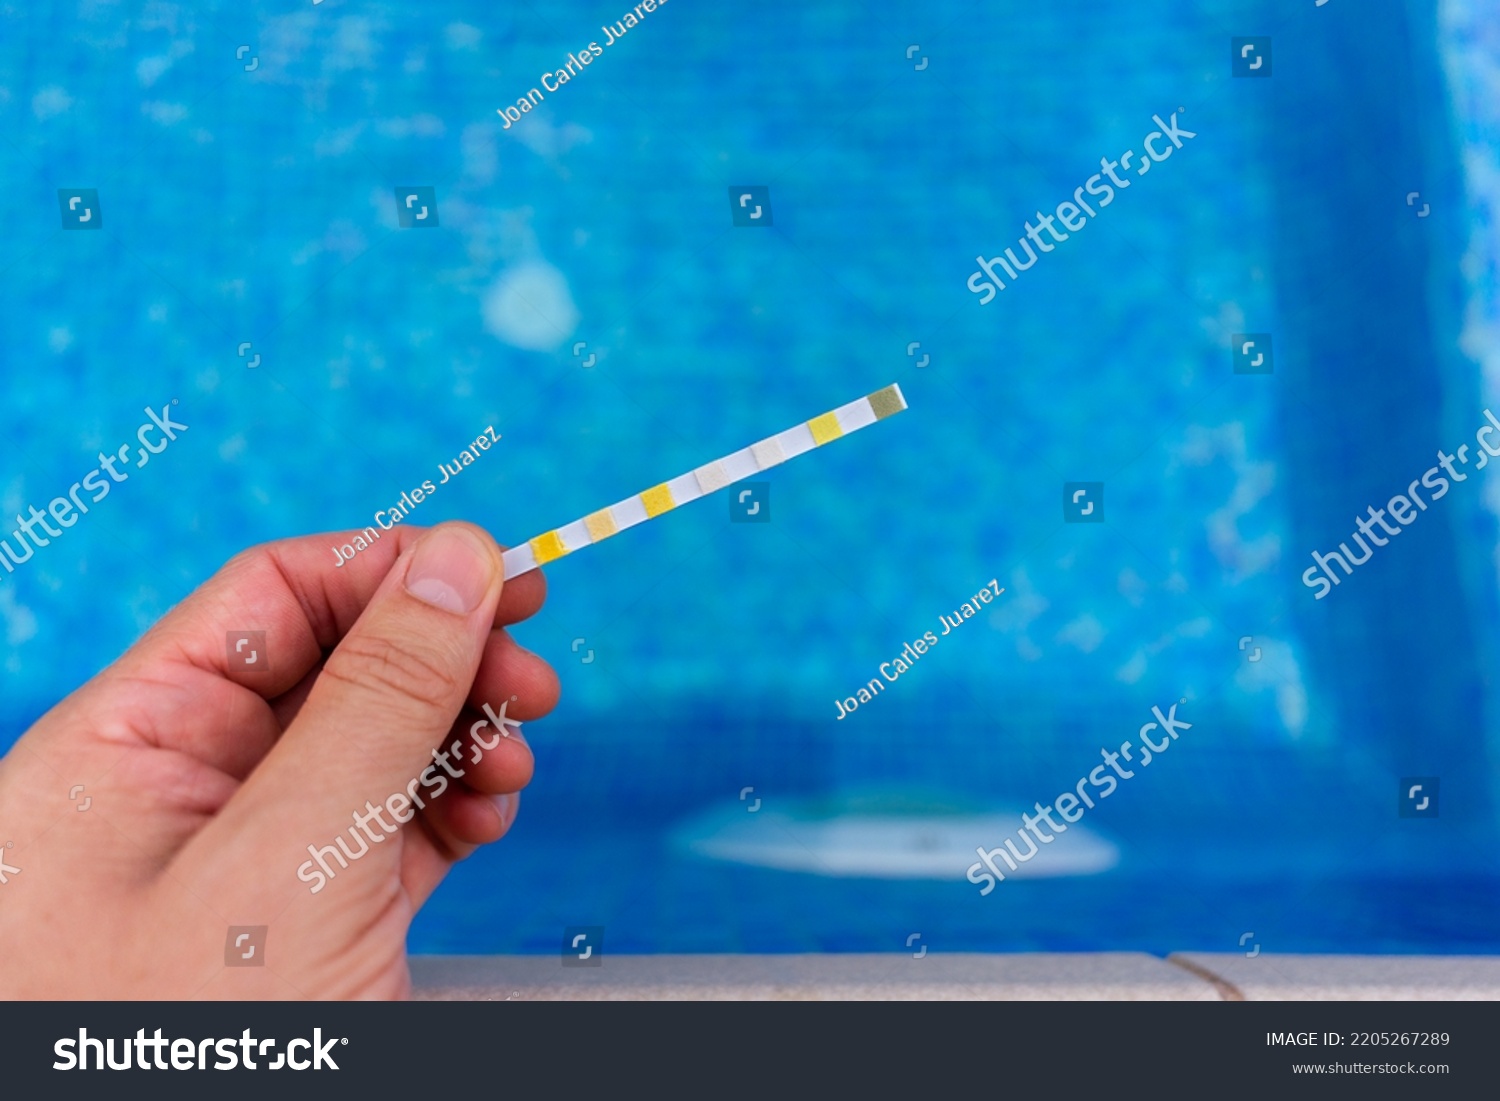 Hand with measuring pool strips to check water quality in a swimming pool #2205267289